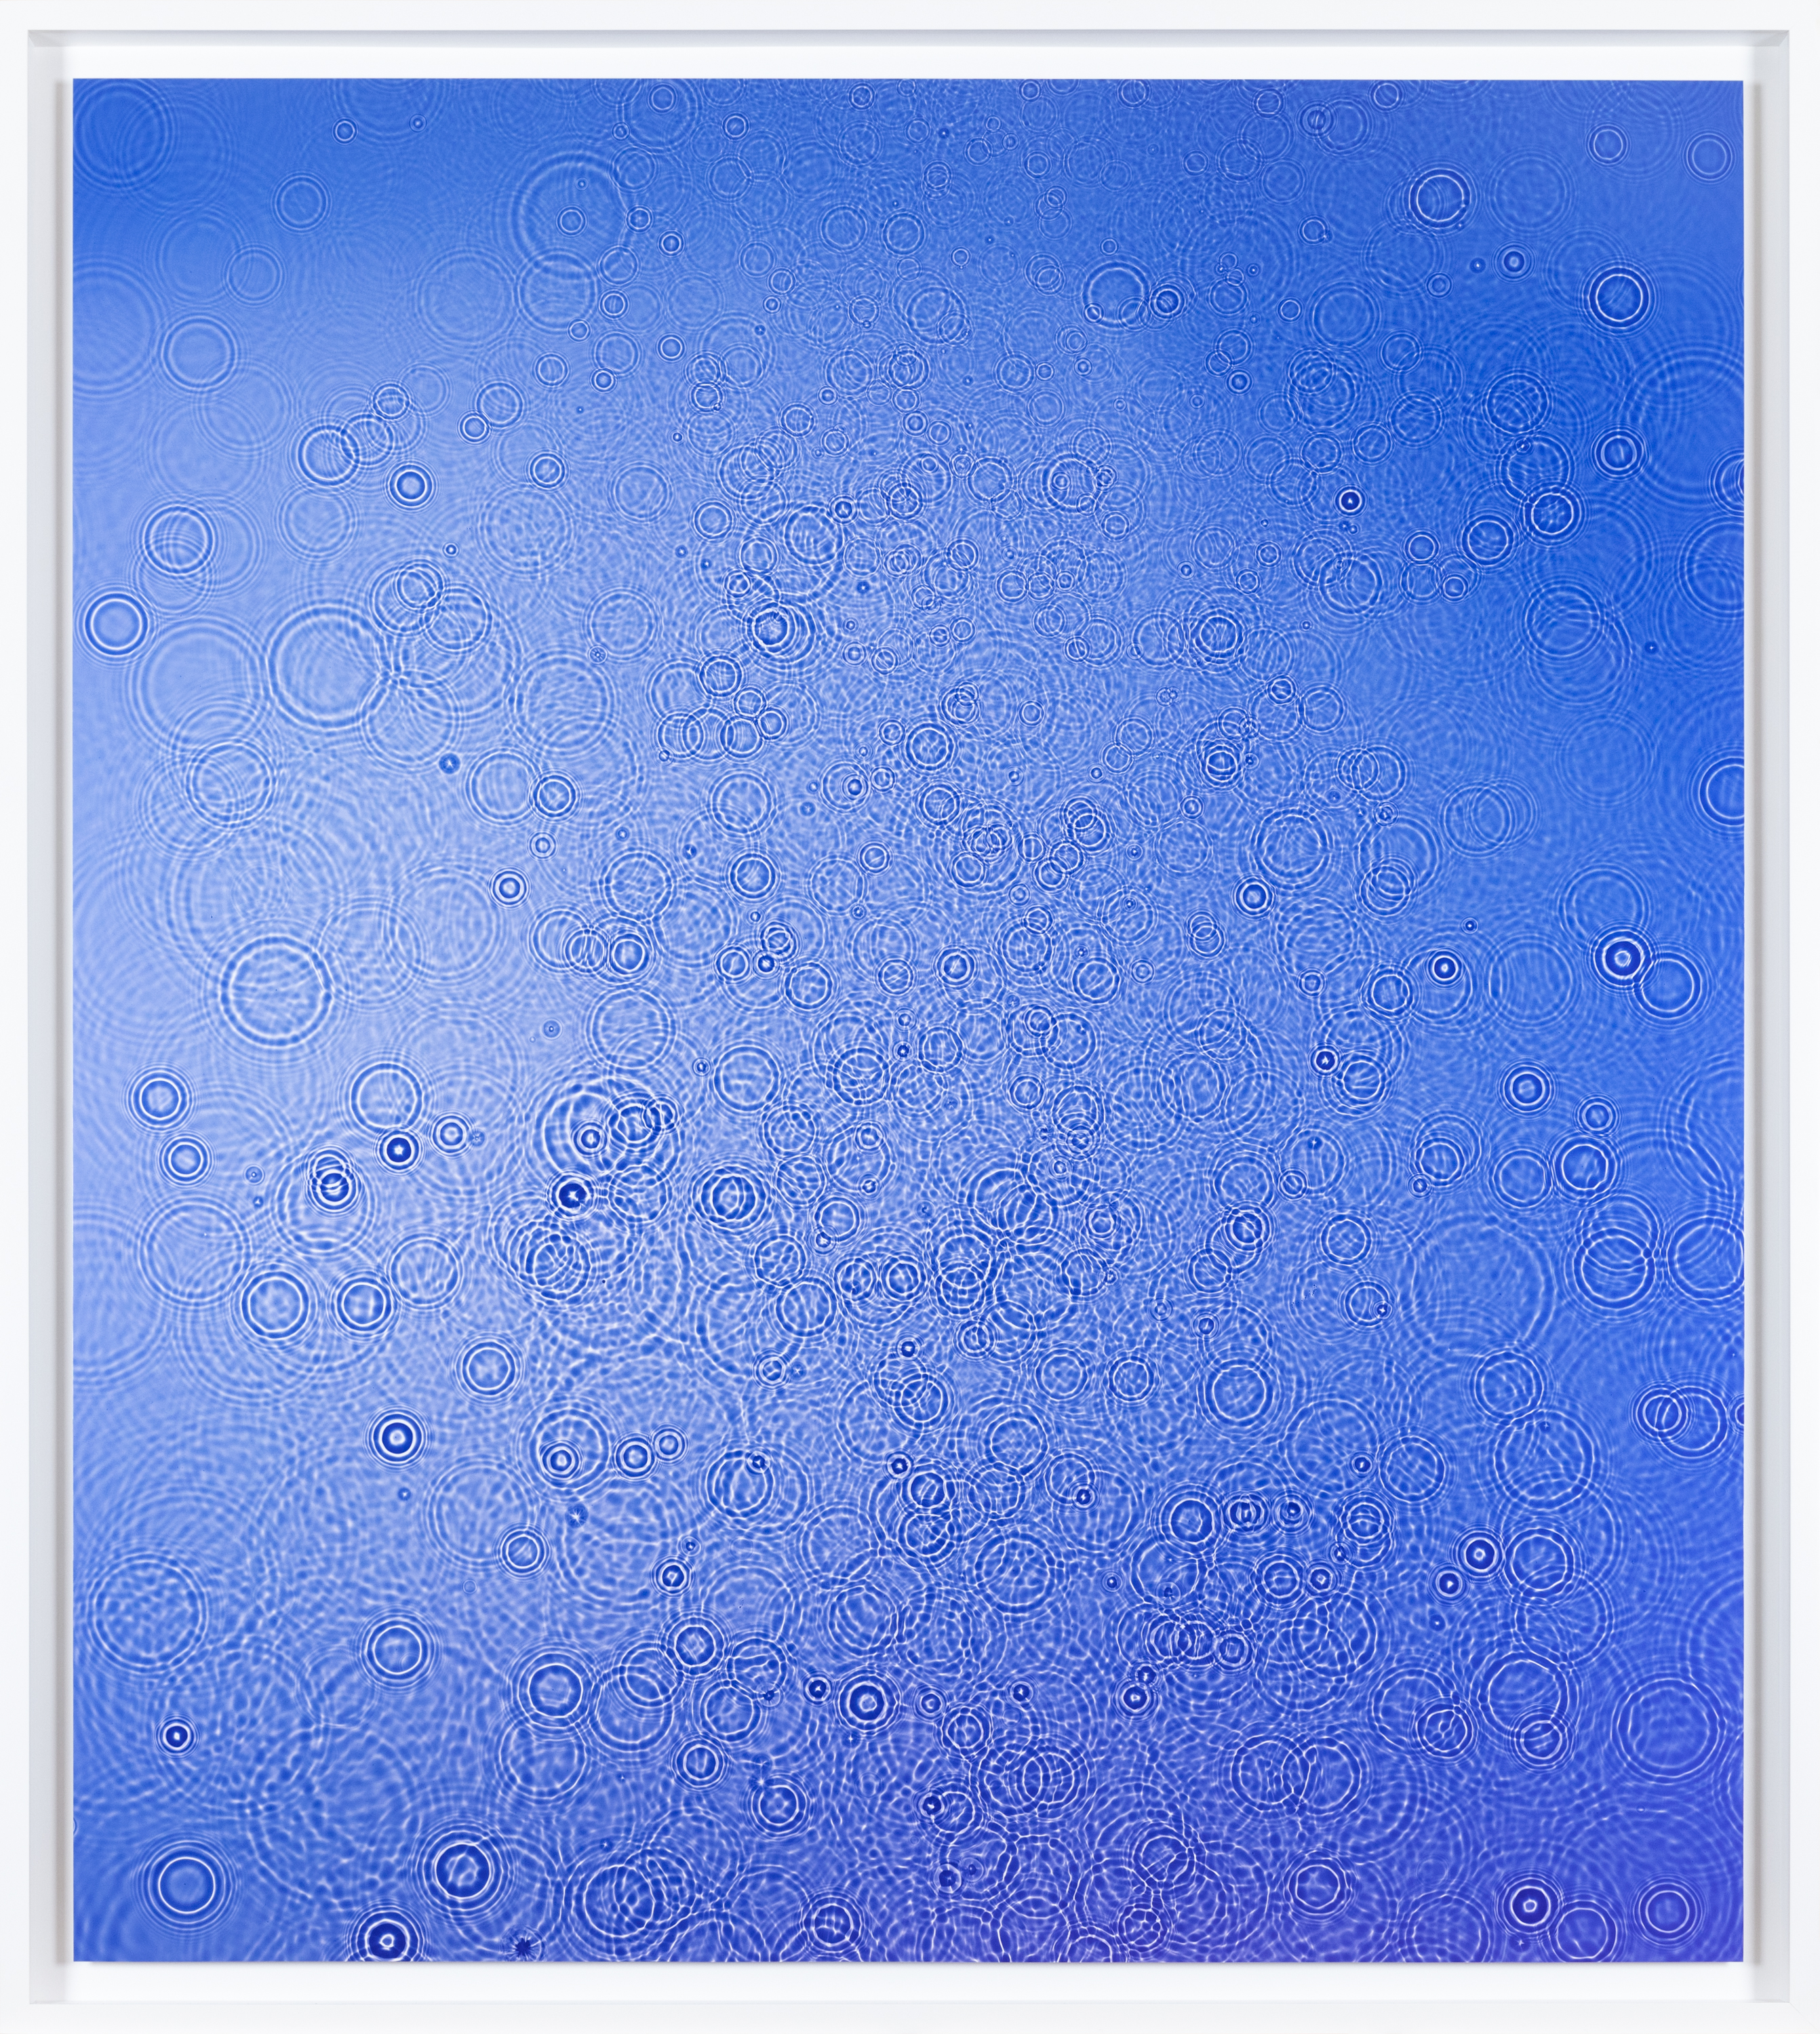 Color image of a color photograph of water droplets on blue background framed in white